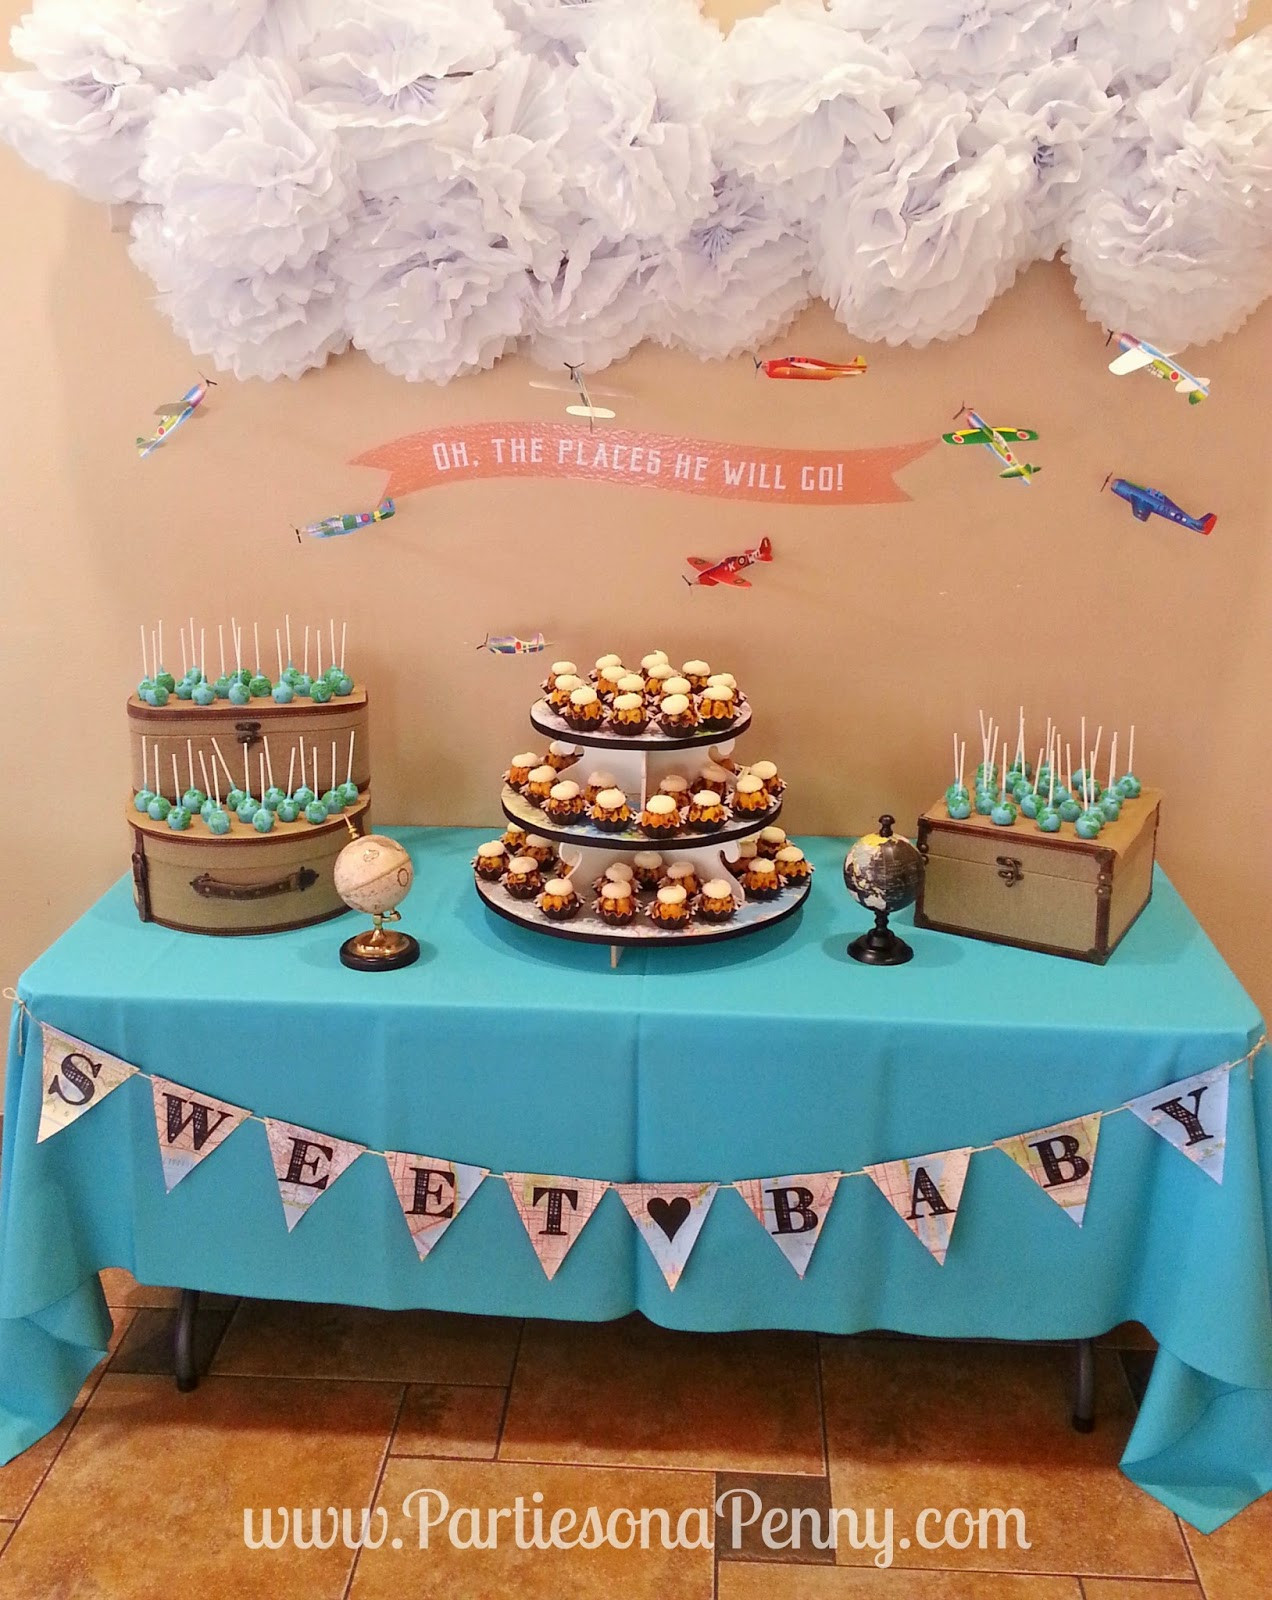 Party City Baby Shower Themes For A Boy
 Parties A Penny Travel Themed Baby Shower